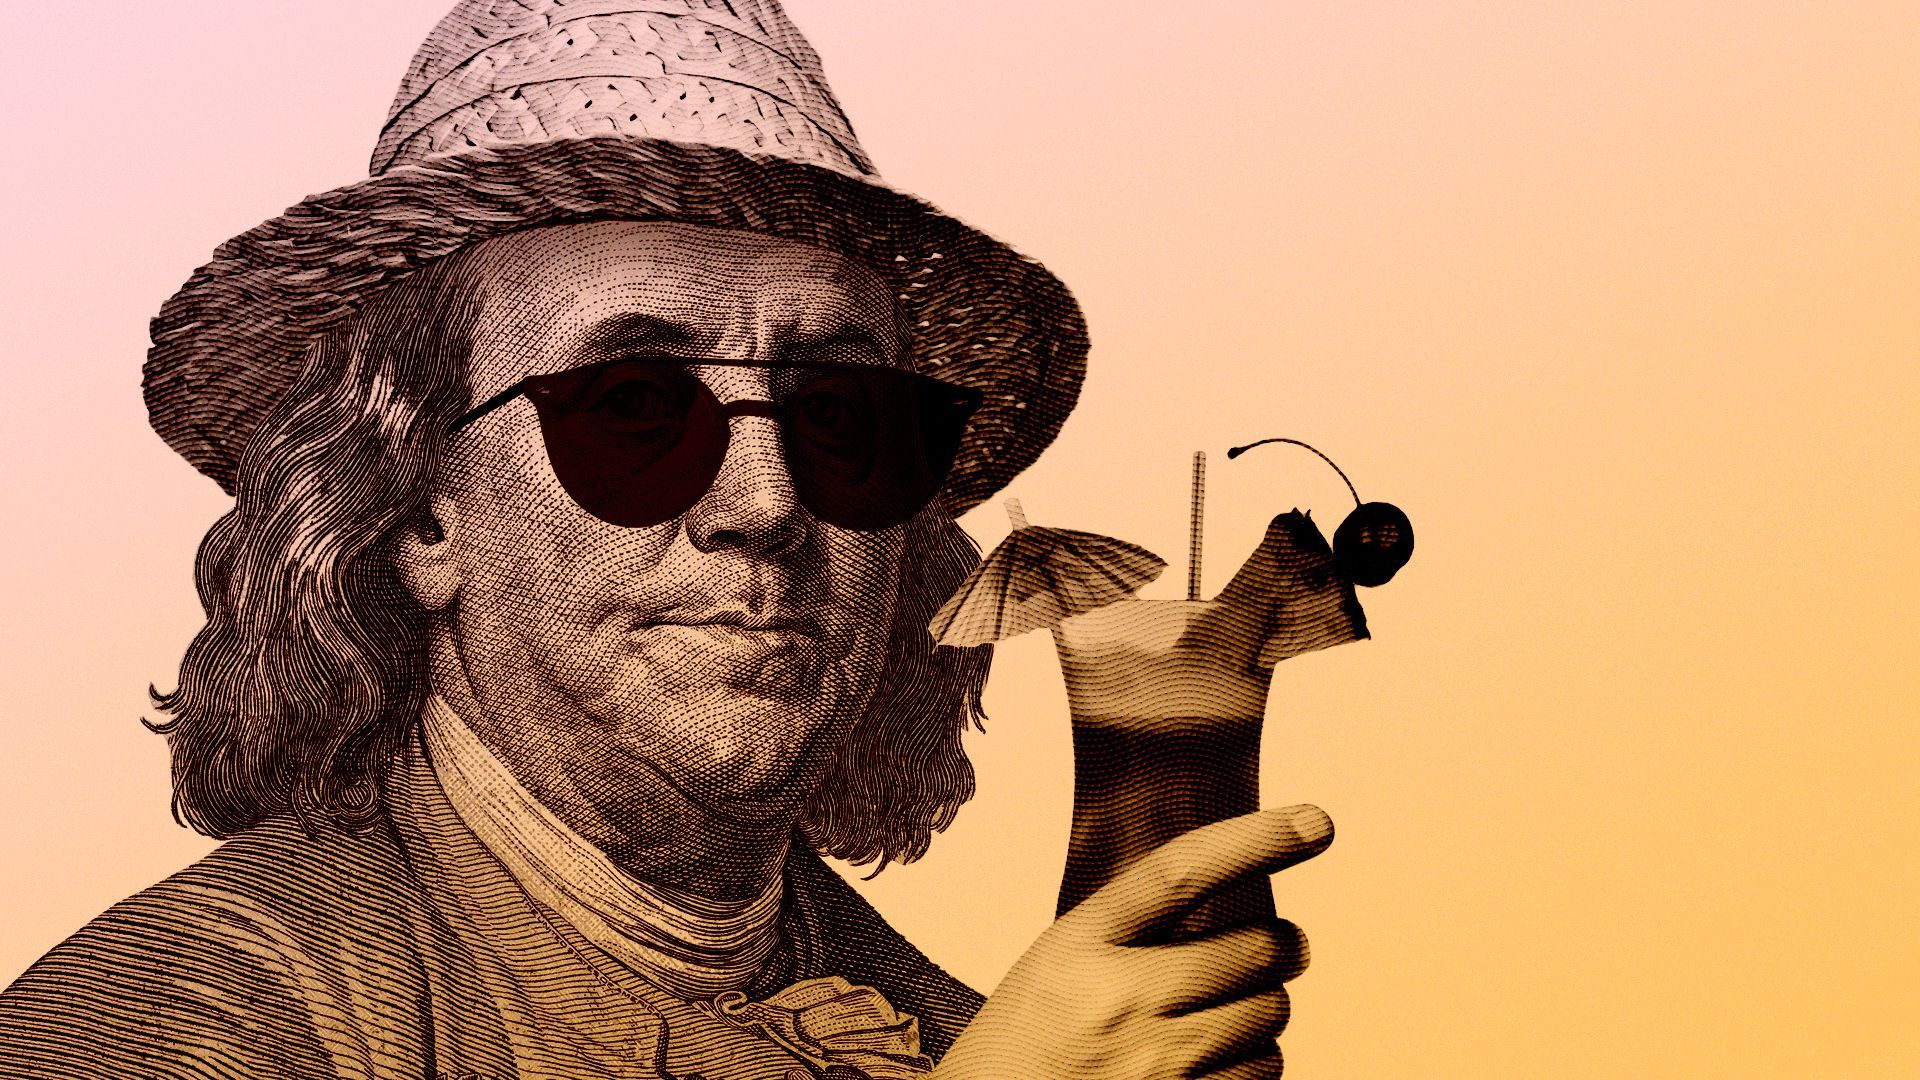 Illustration of Benjamin Franklin holding a tropical cocktail while wearing a sunhat and sunglasses.